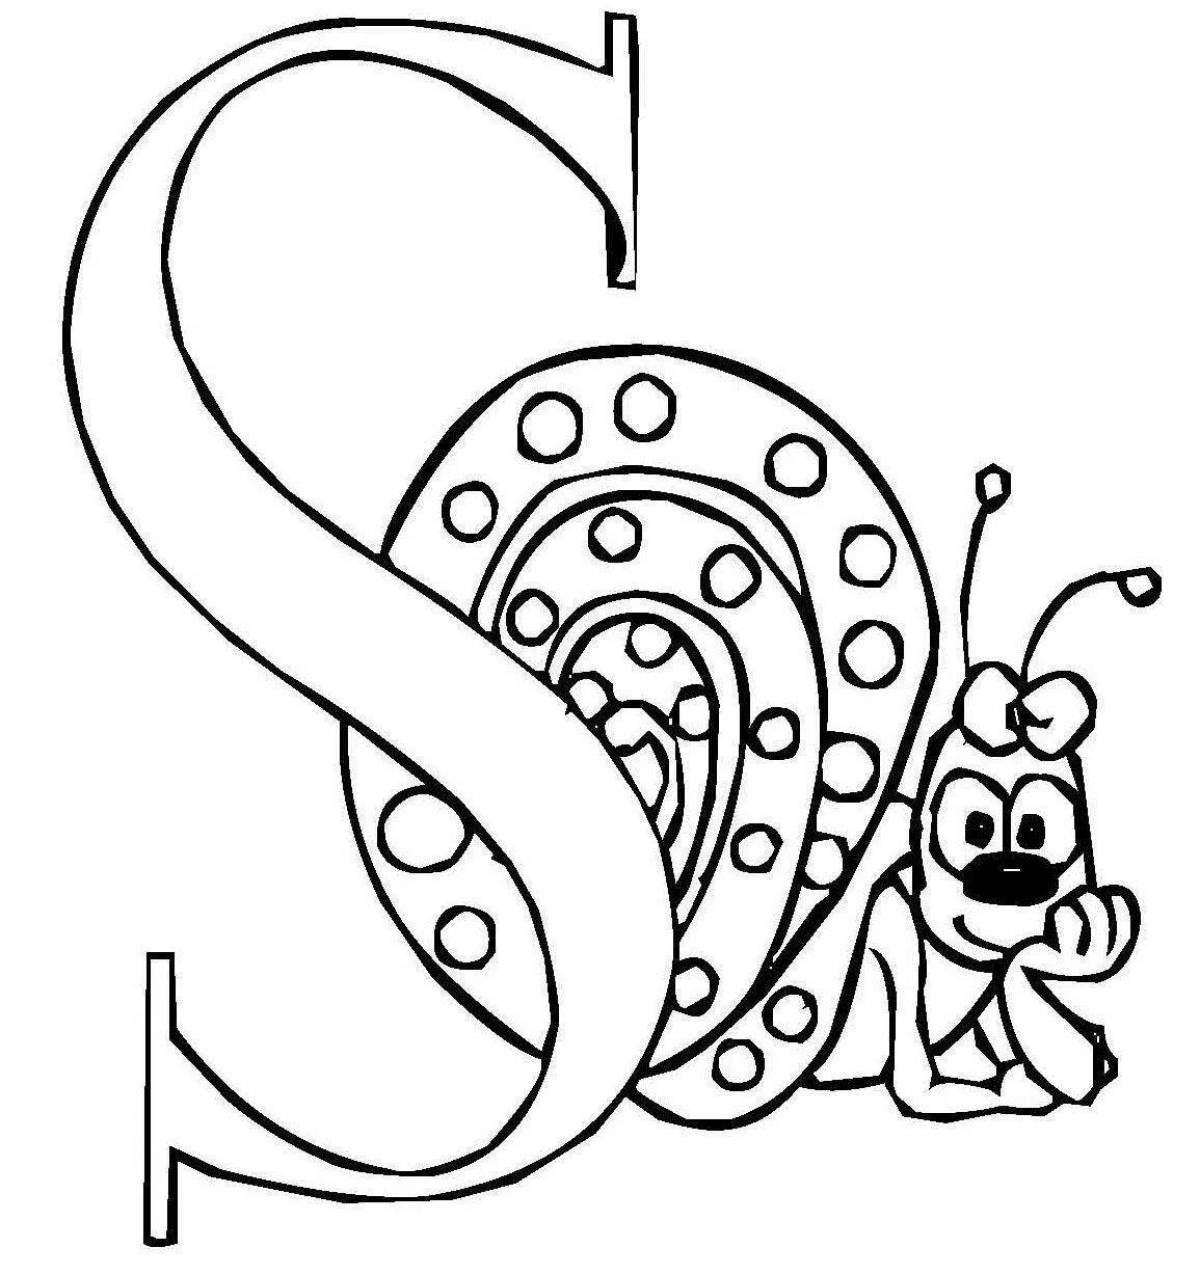 Coloring playful letter s